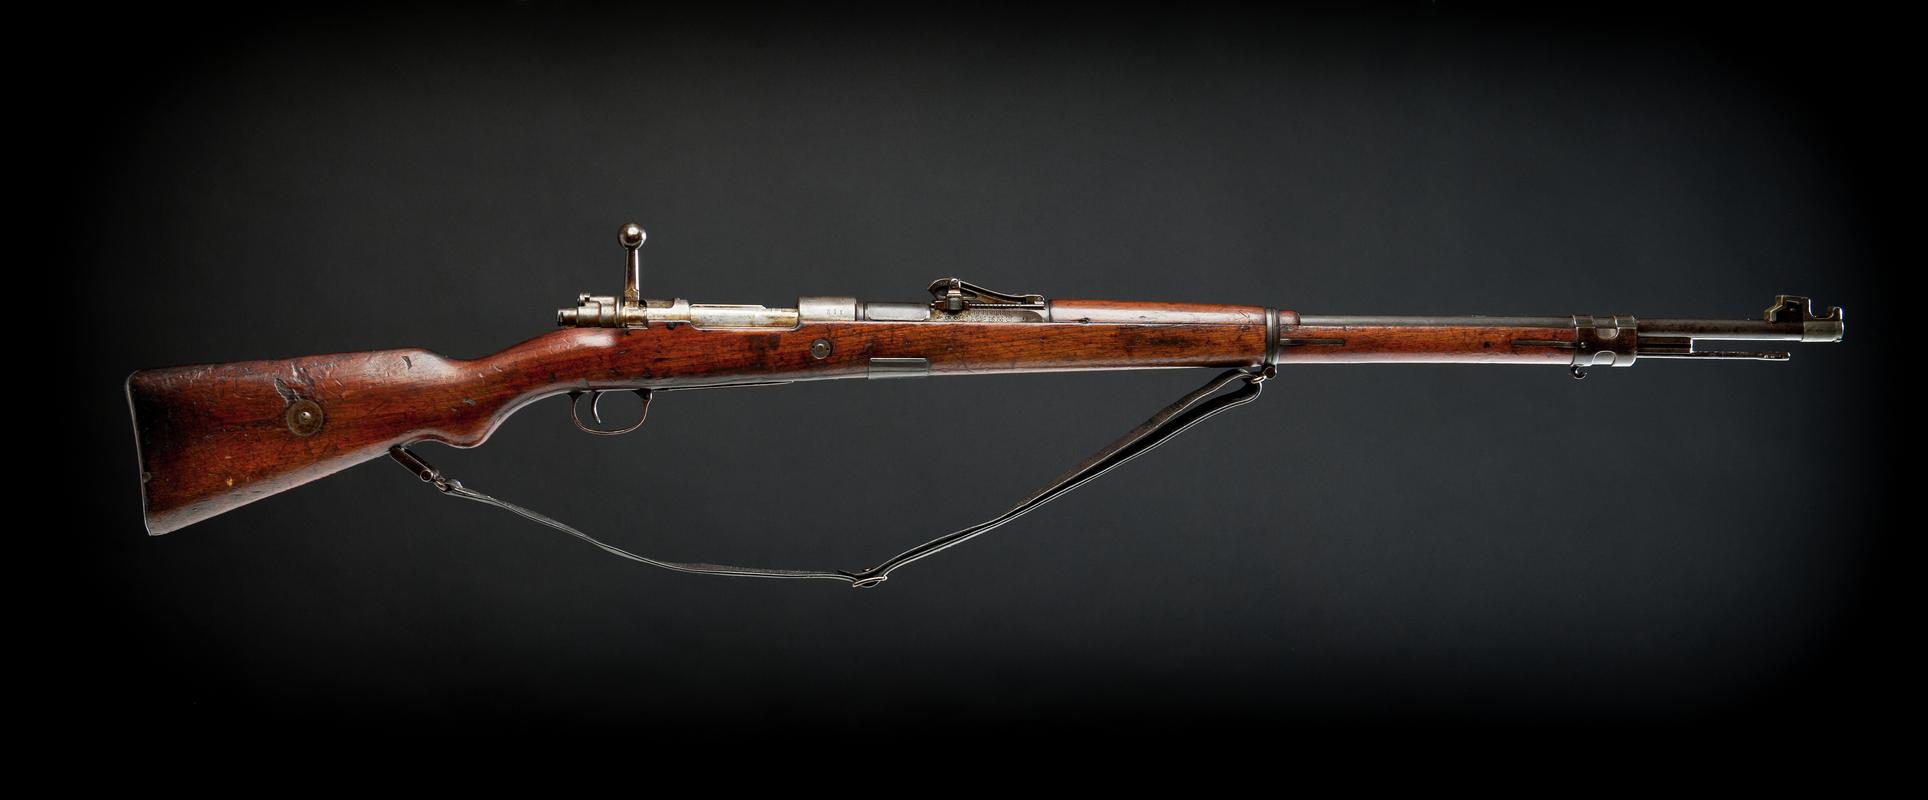 Amberg 5-shot bolt action rifle, with a leather carrying strap and cleaning rod. Fitted with sights on barrel.